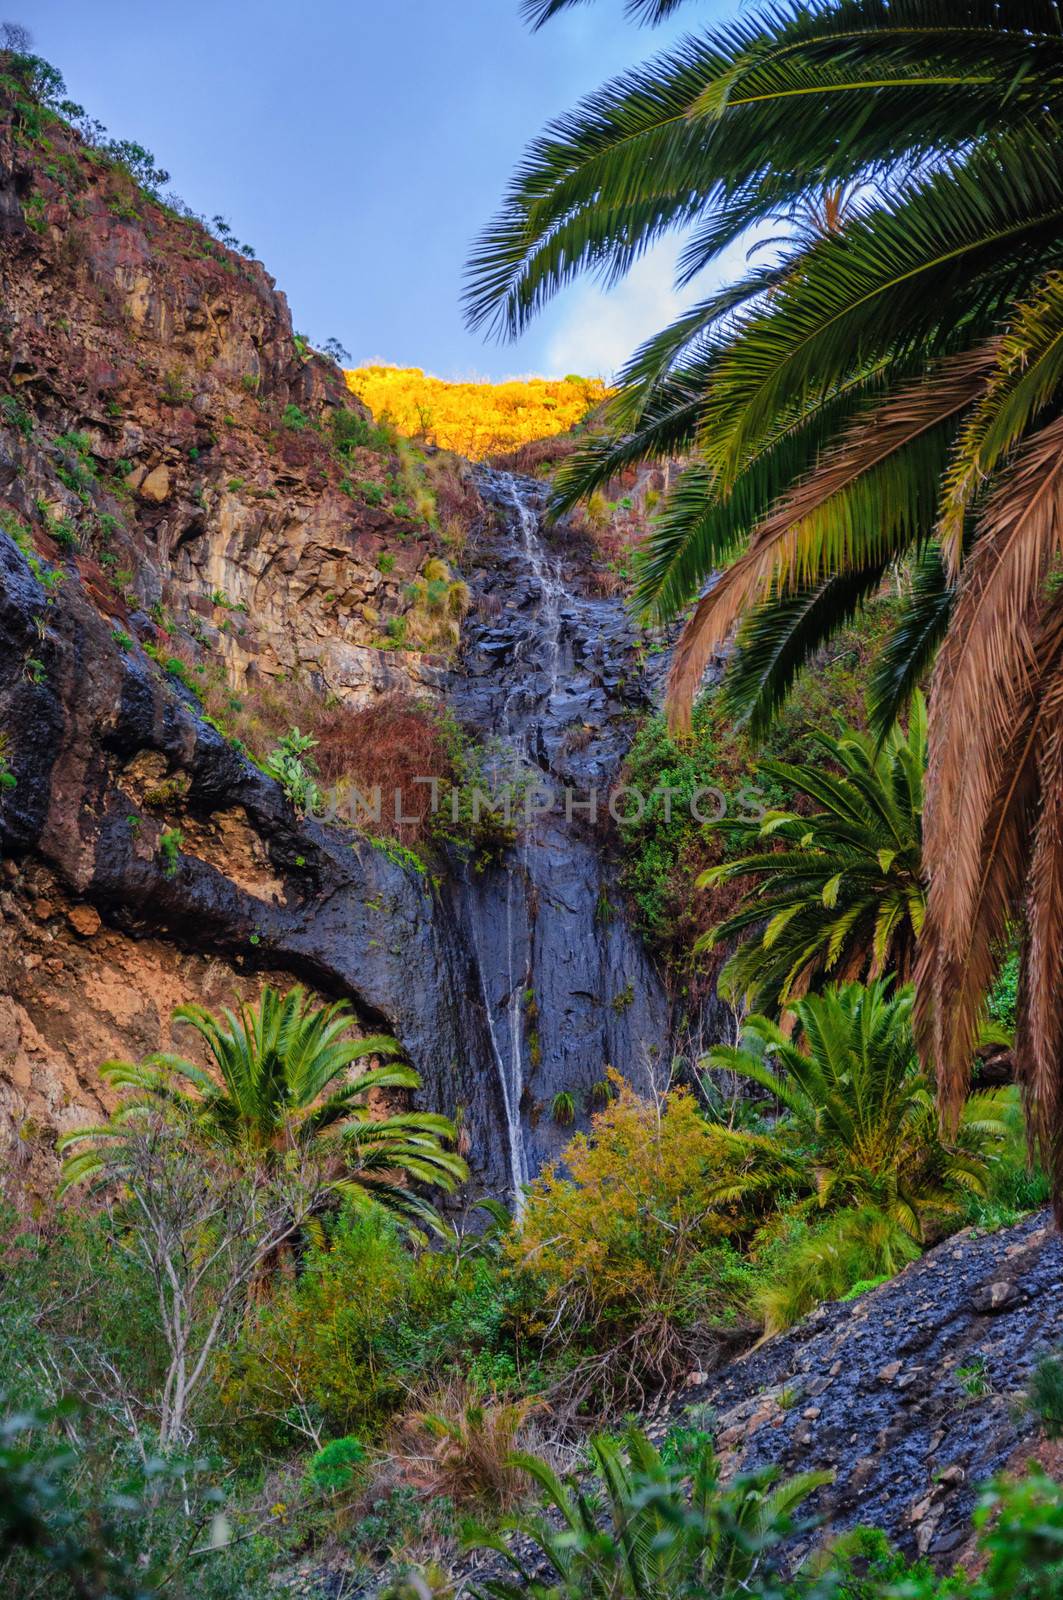 Waterfall near Masca village with mountains, Tenerife, Canarian Islands